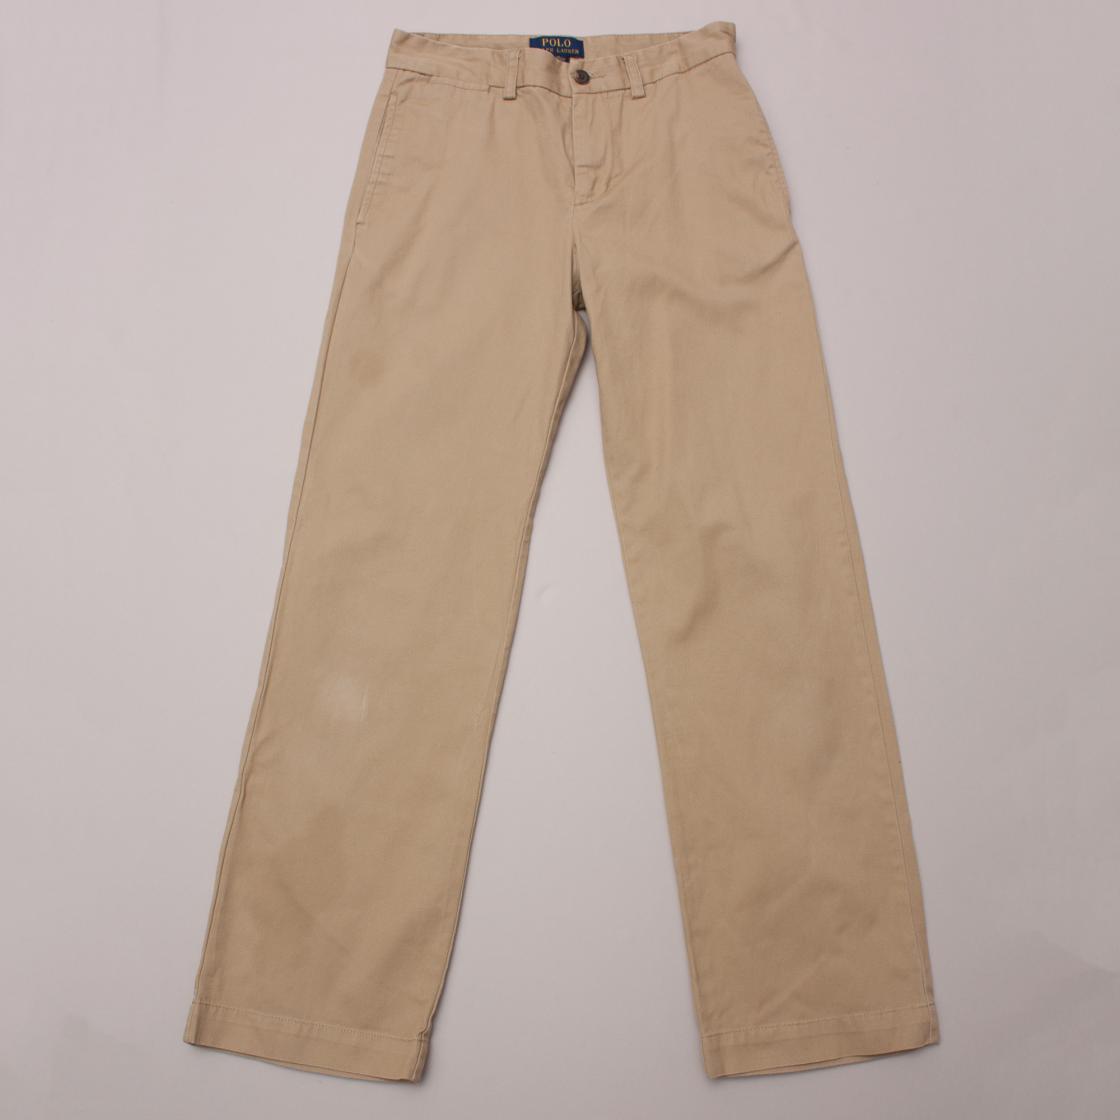 Polo Ralph Lauren Pants (Reduced - WAS $30)